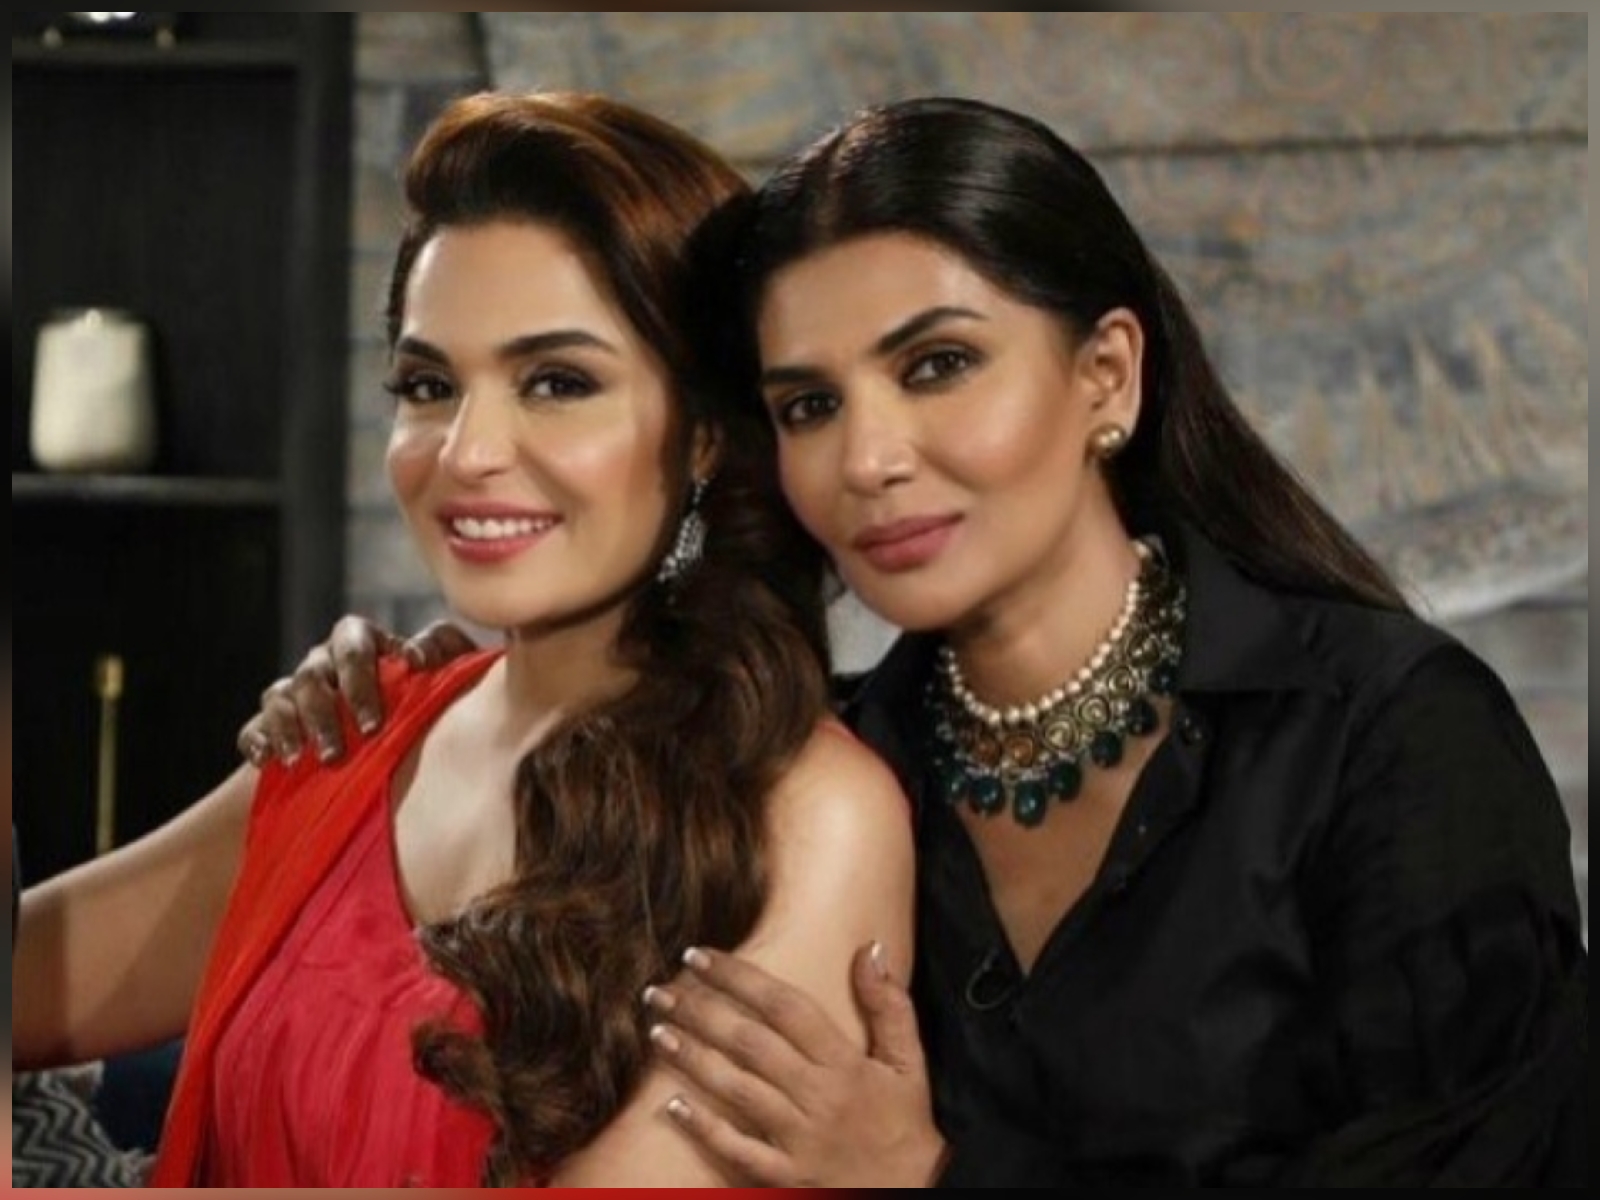 Meera and Iffat Omar Exchanged Heated Arguments on Age